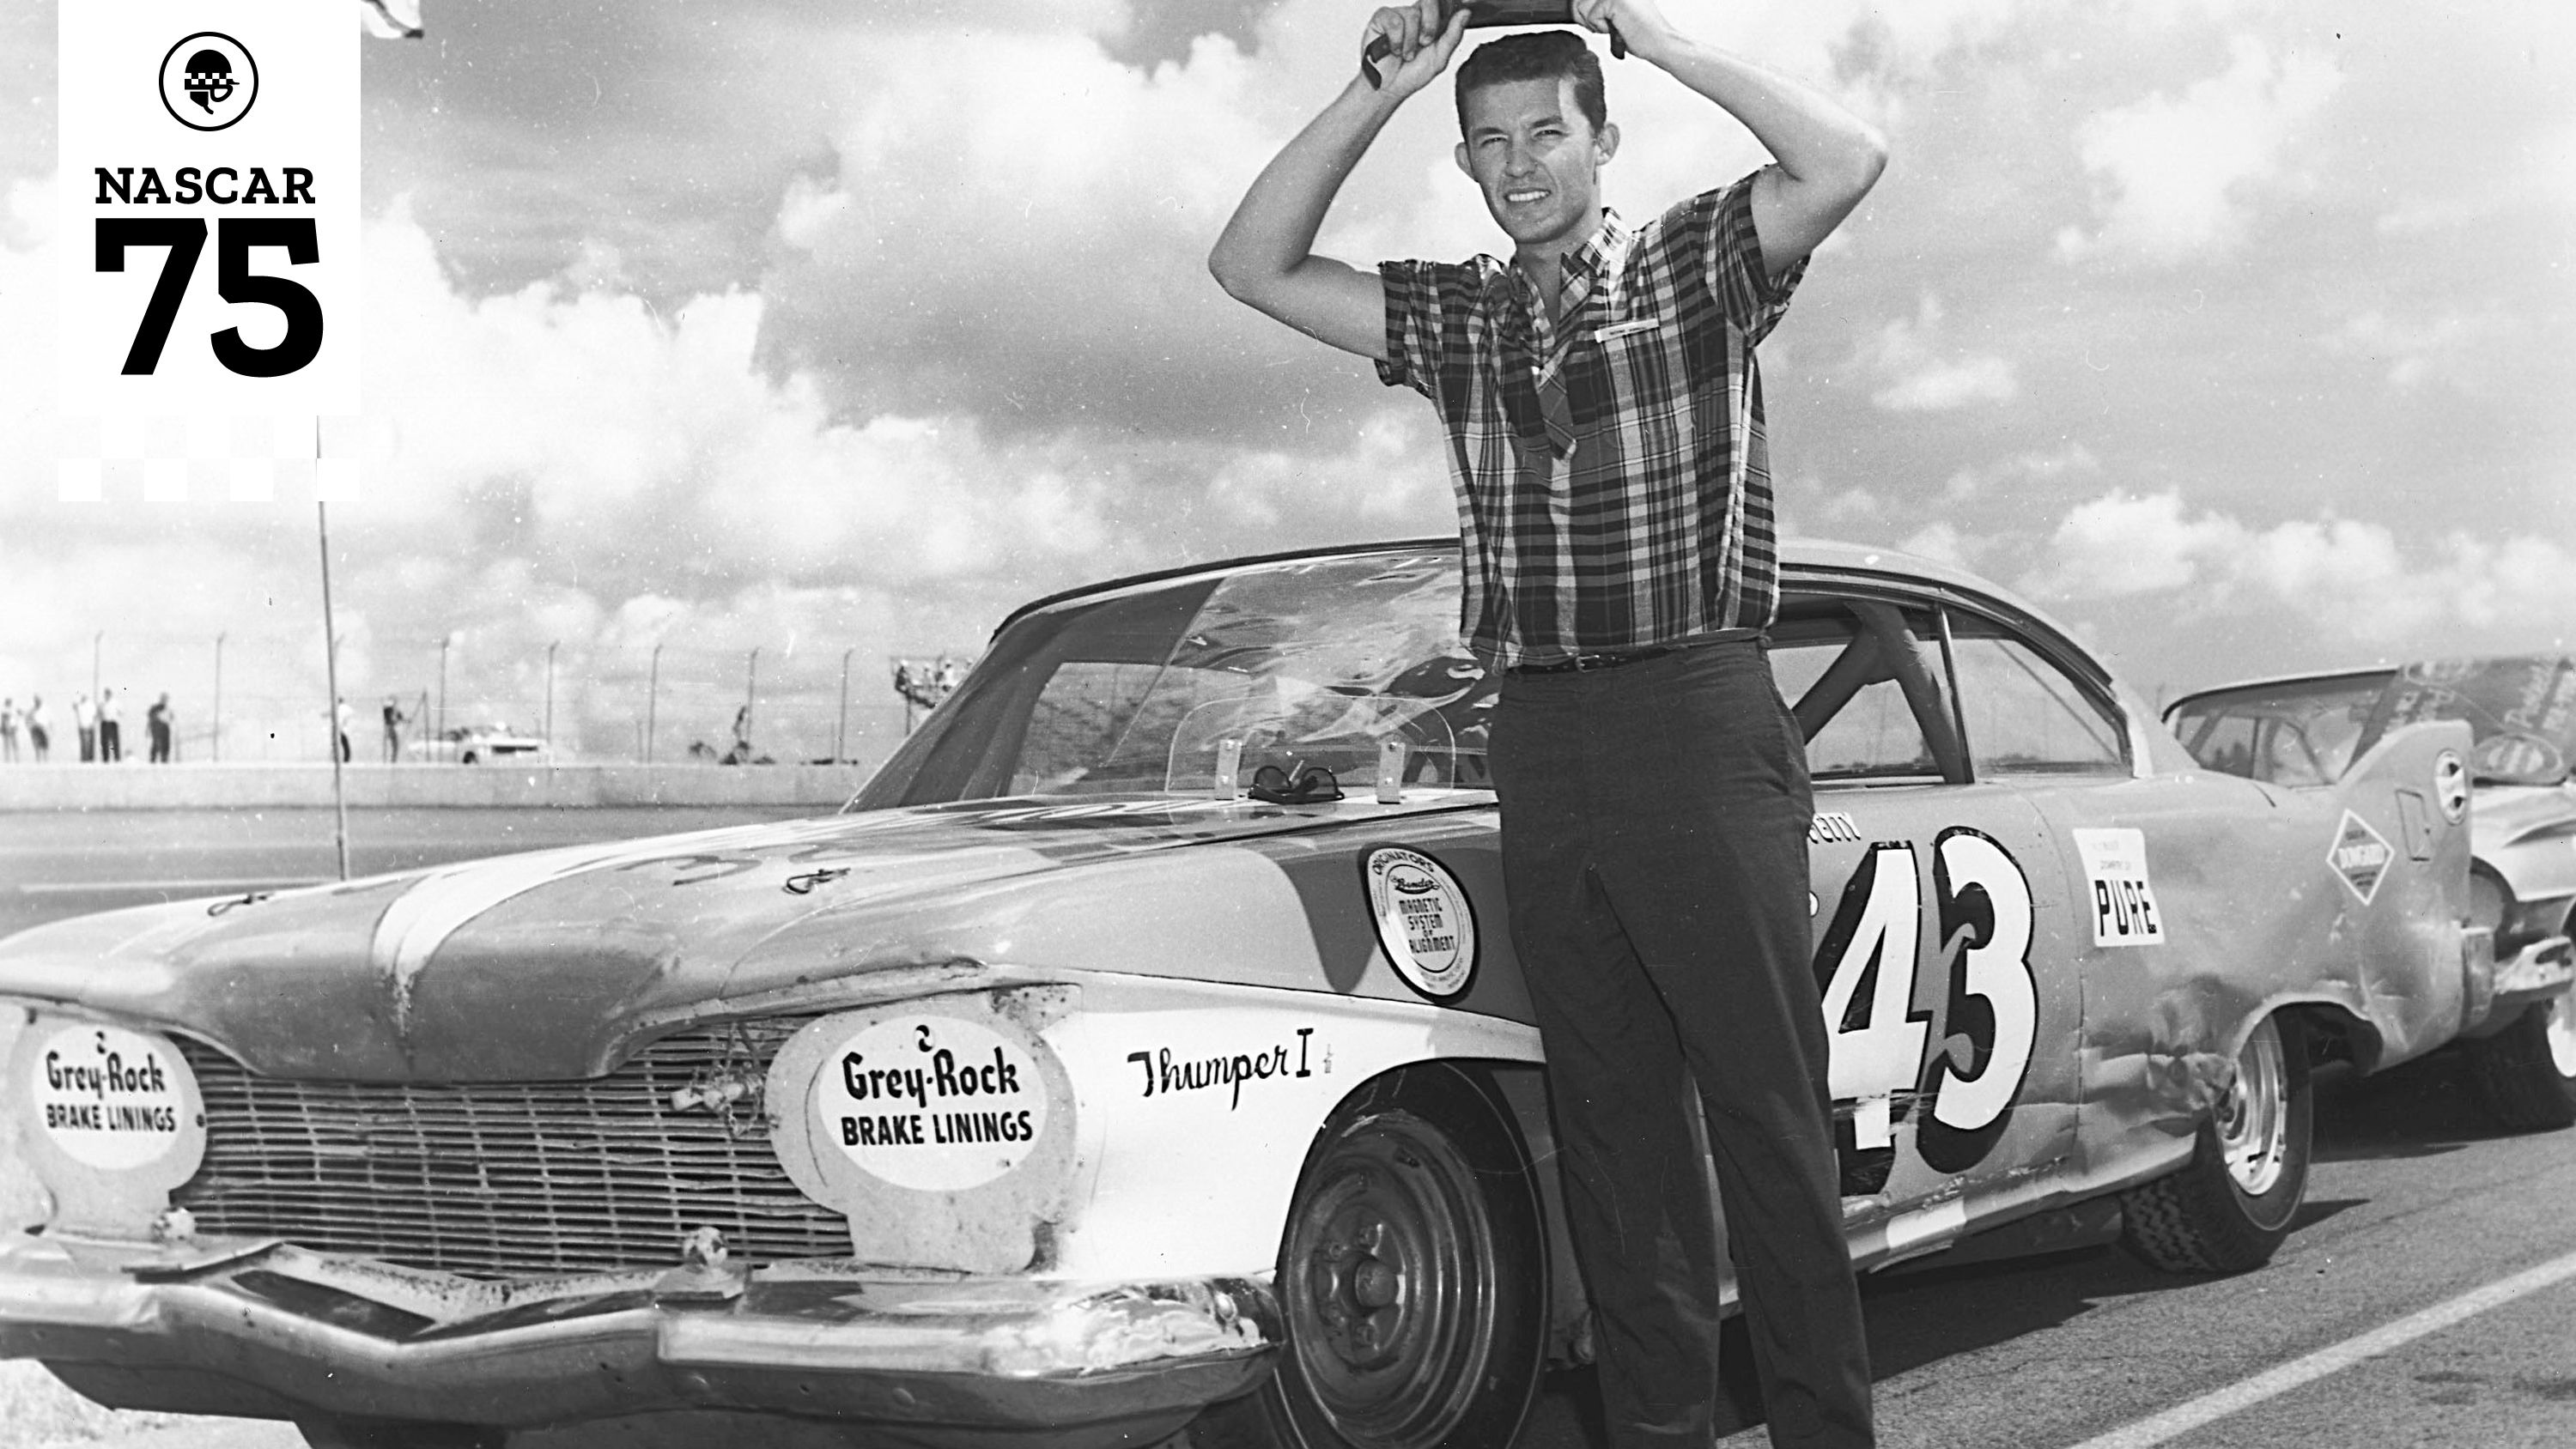 Young Richard Petty Gets NASCAR Win No. 1 on His Way to 200 in 1960